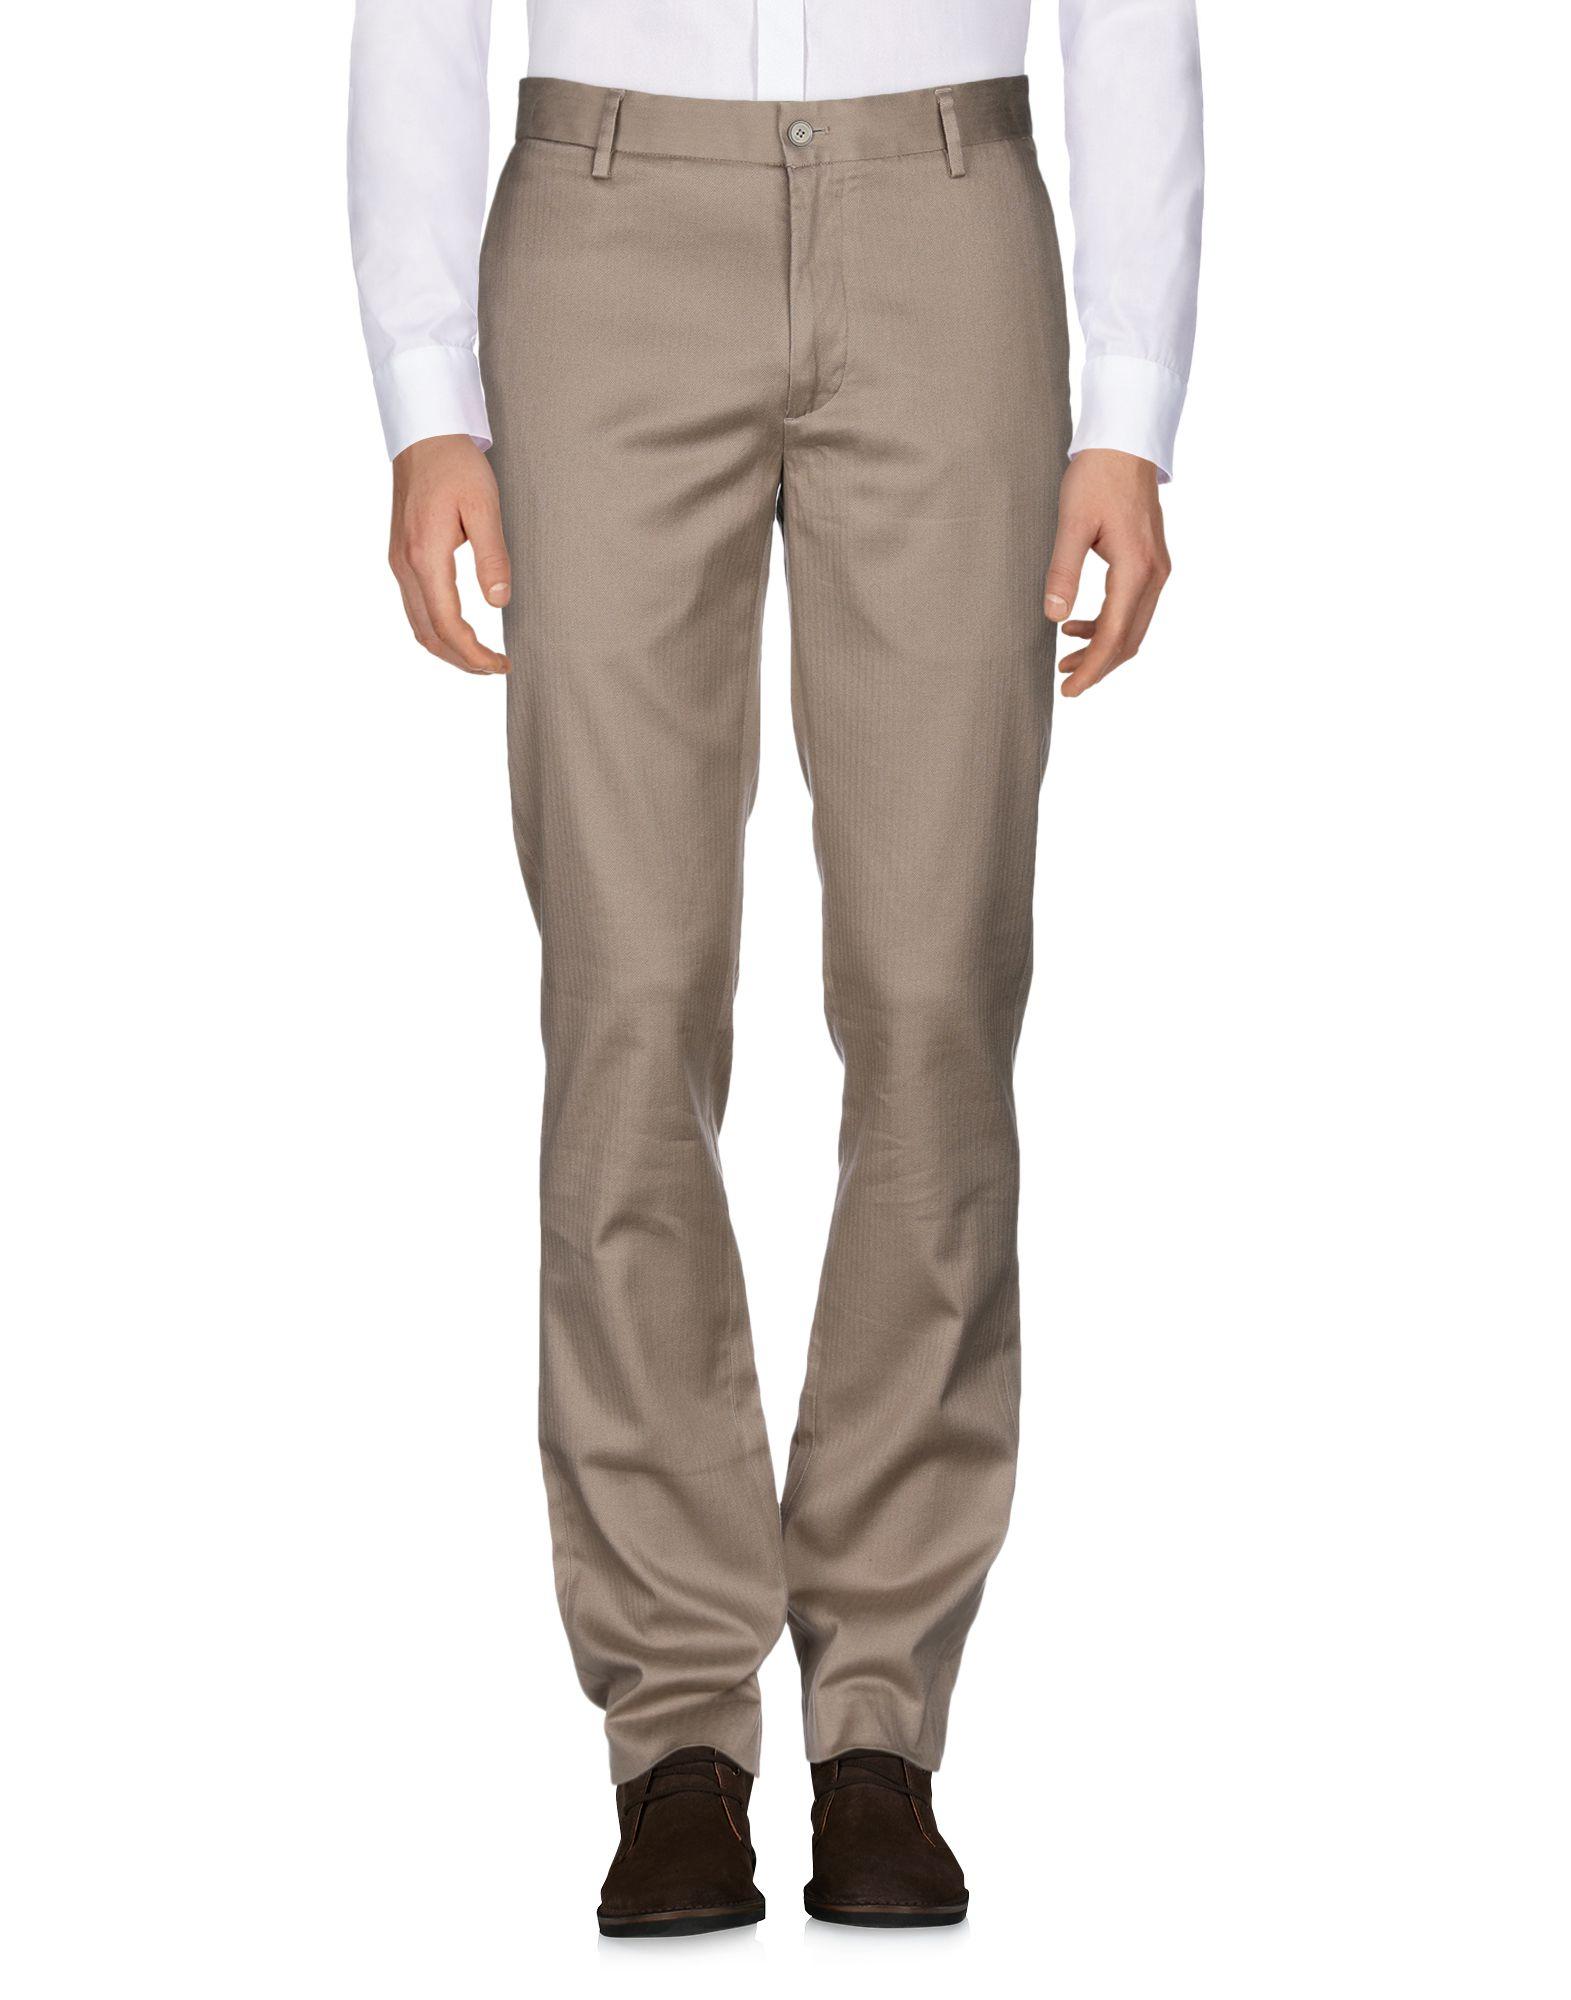 Dockers Cotton Casual Pants in Light Brown (Brown) for Men - Lyst